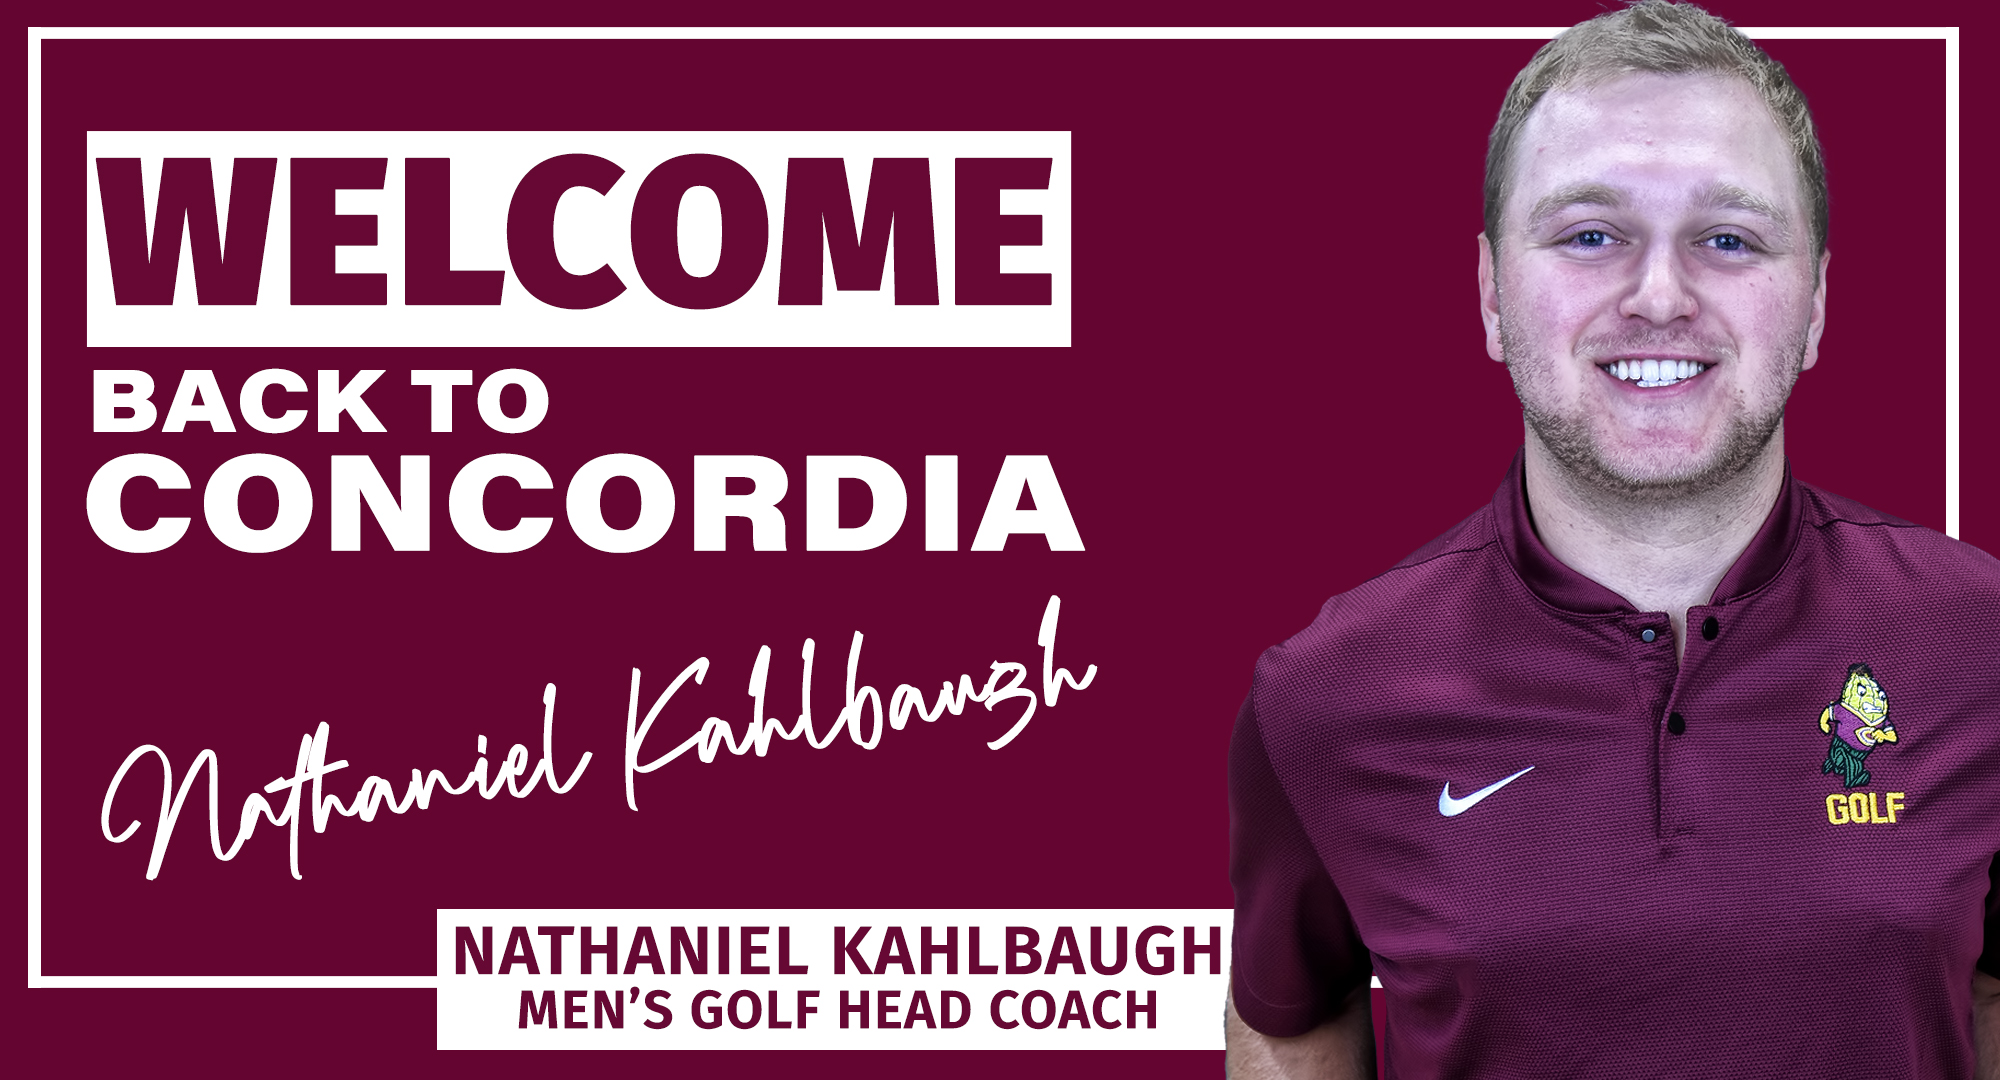 Former Cobber  golfer Nathaniel Kahlbaugh was named the new head coach. He becomes the 10th head coach in program history.